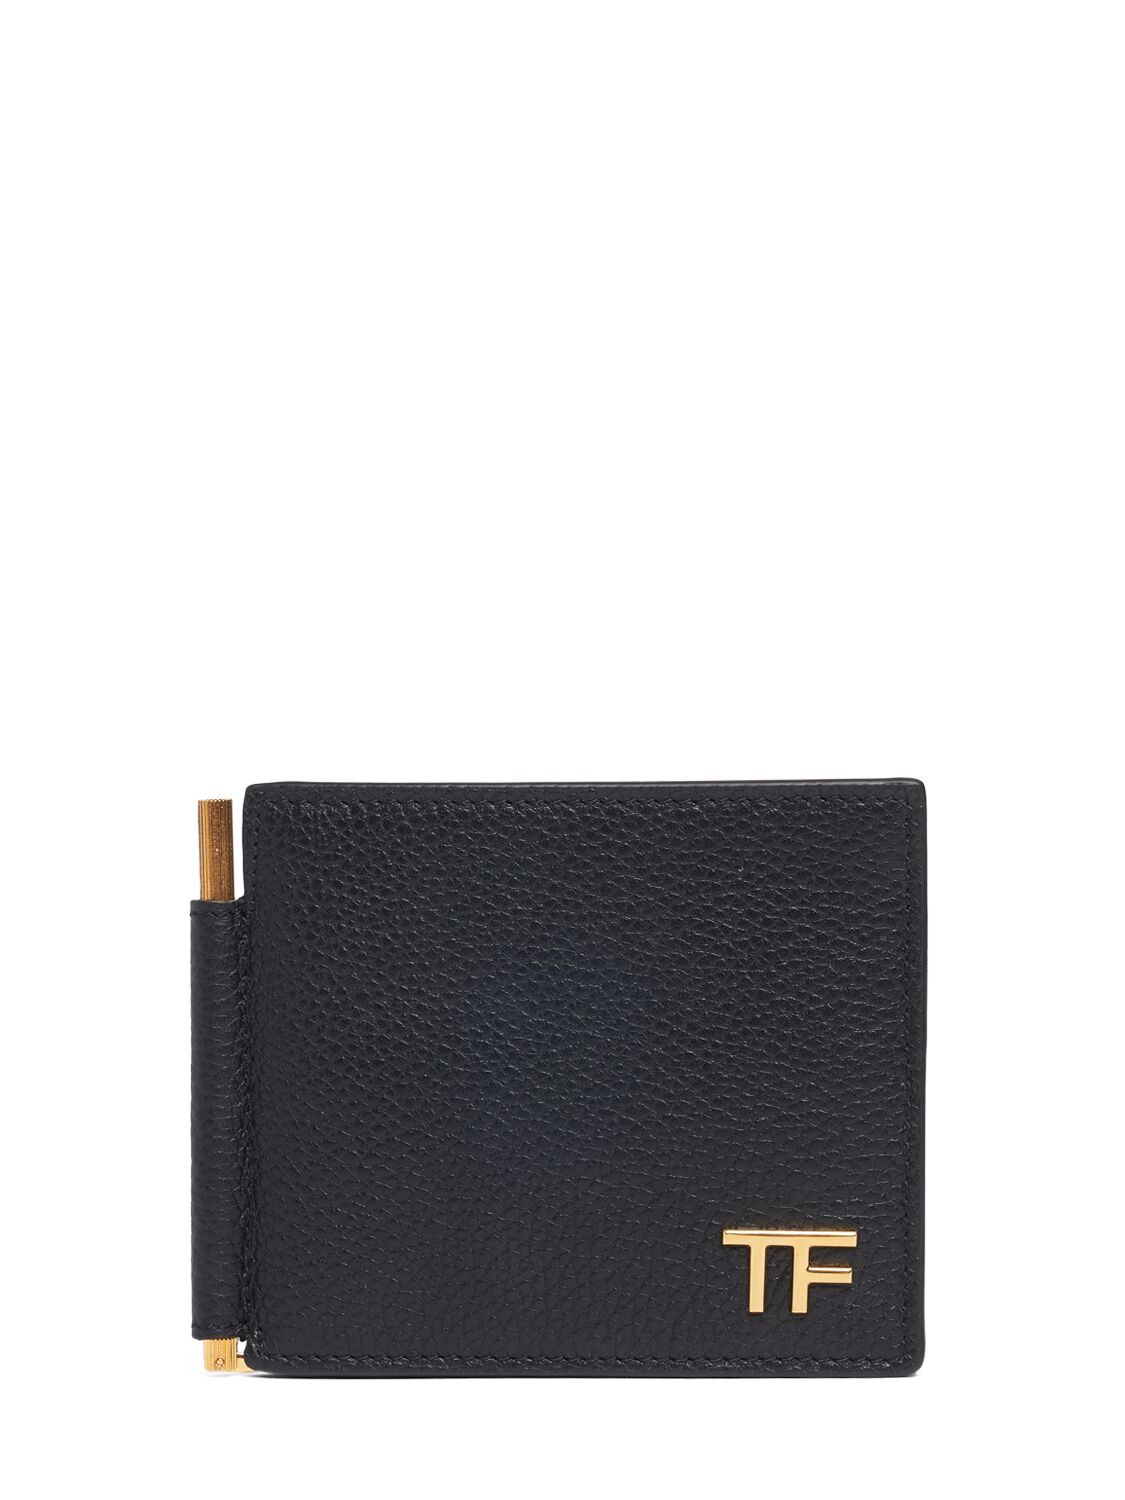 Tom Ford Soft Grained Leather Wallet In Black